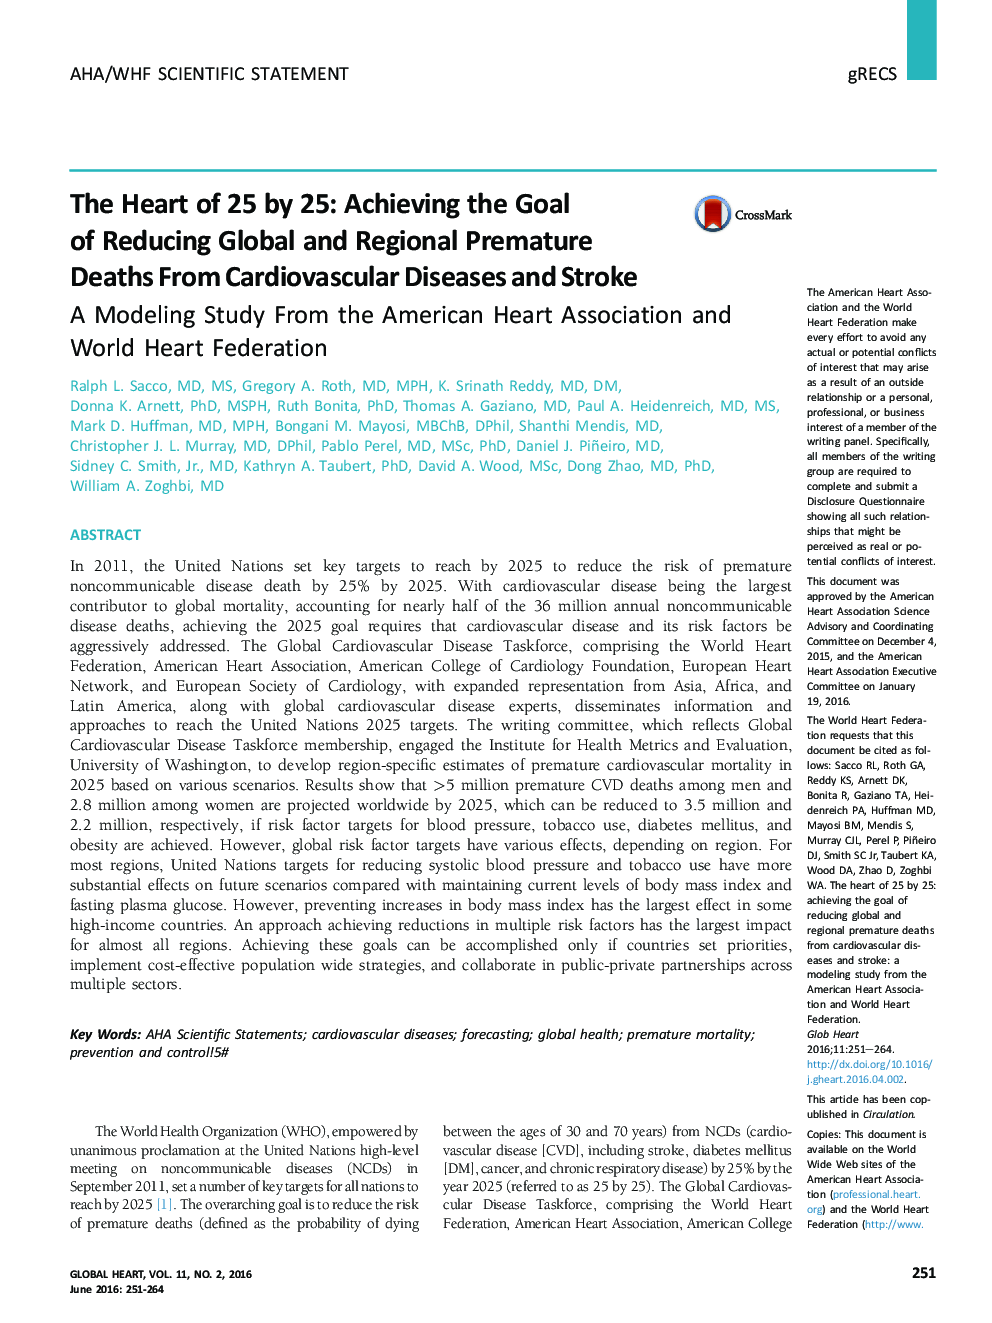 The Heart of 25 by 25: Achieving the Goal of Reducing Global and Regional Premature Deaths From Cardiovascular Diseases and Stroke : A Modeling Study From the American Heart Association and World Heart Federation